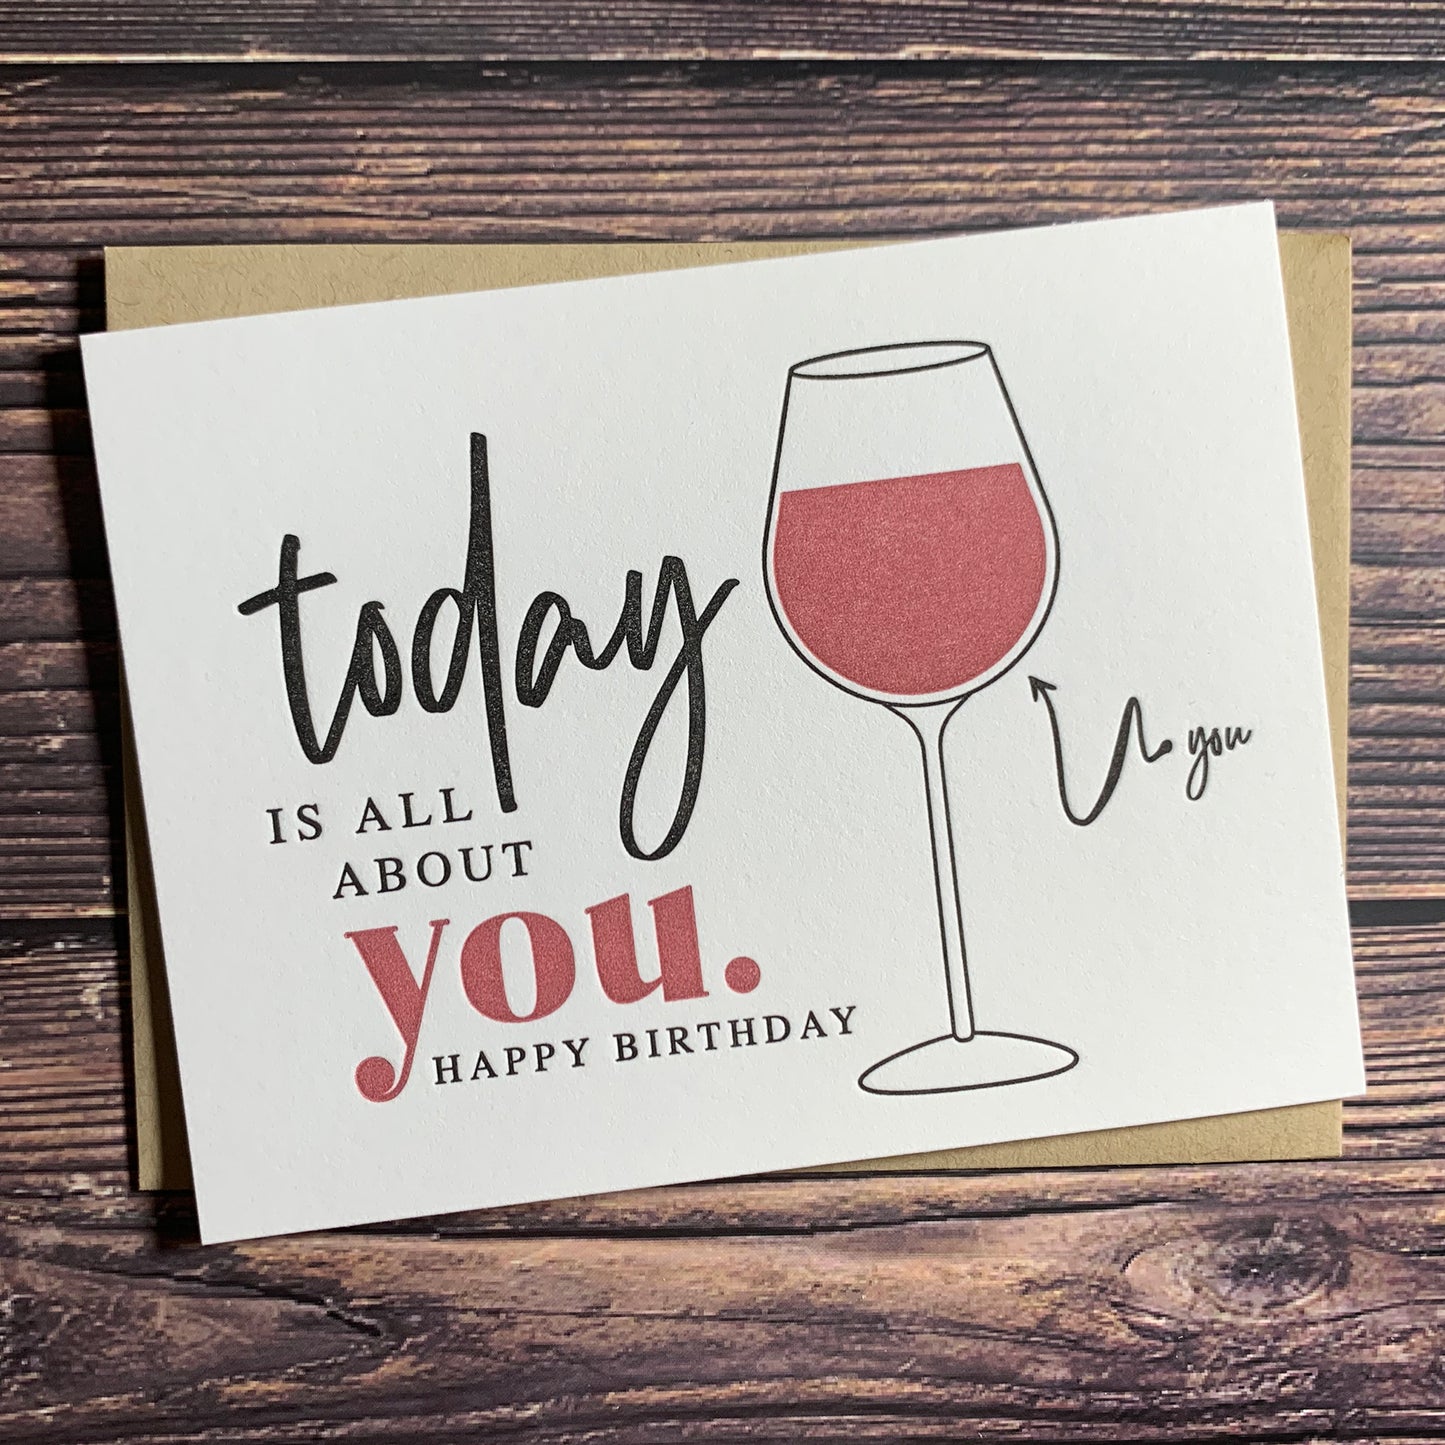 All About You Card. Birthday card for best friend.